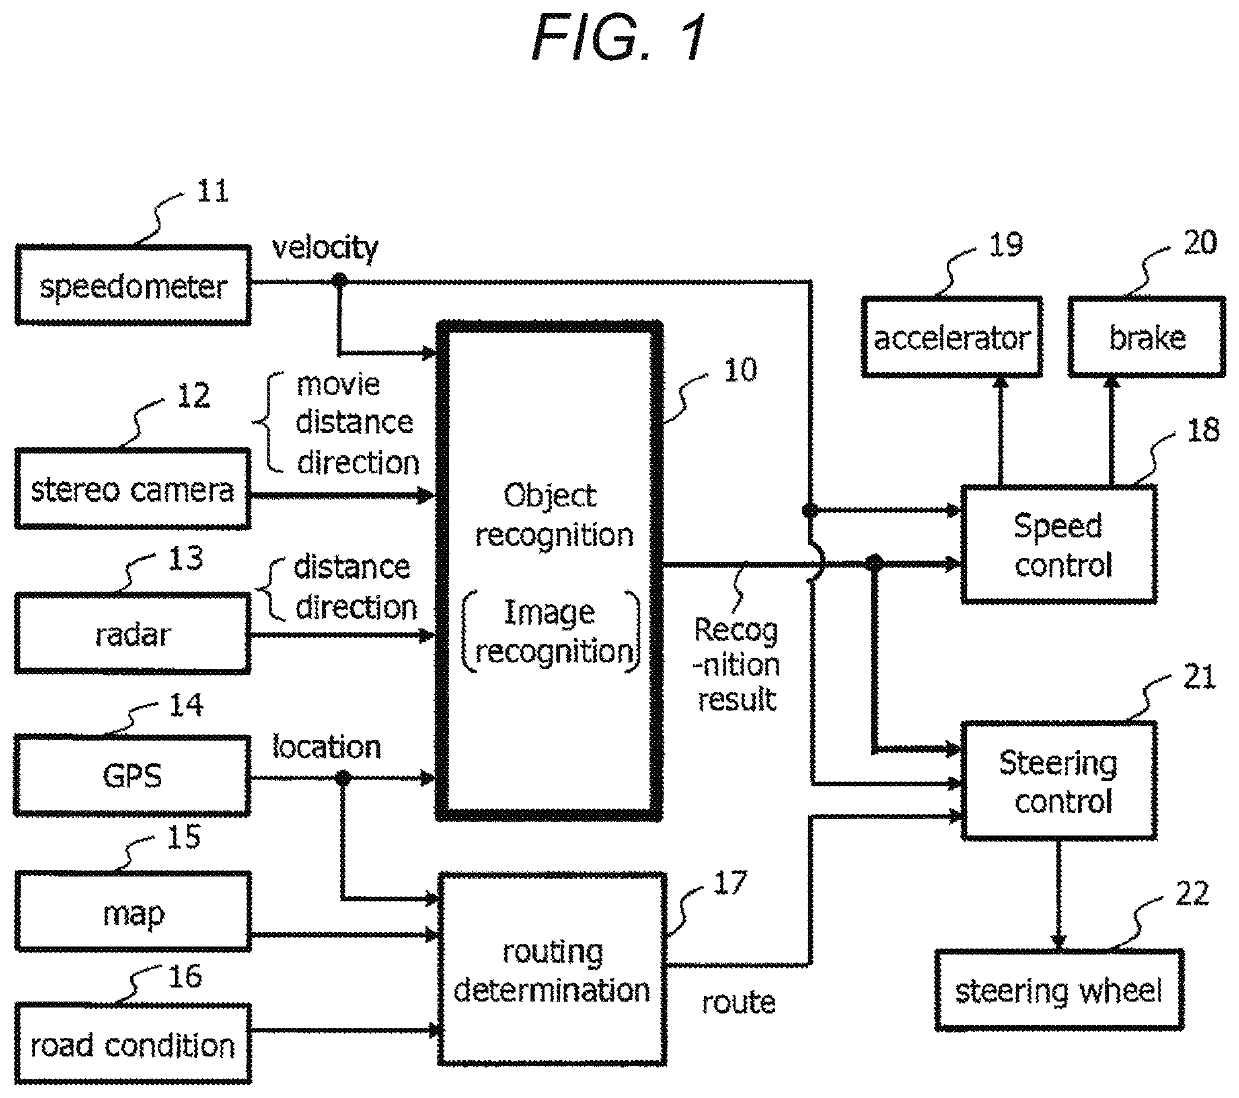 Image recognition system